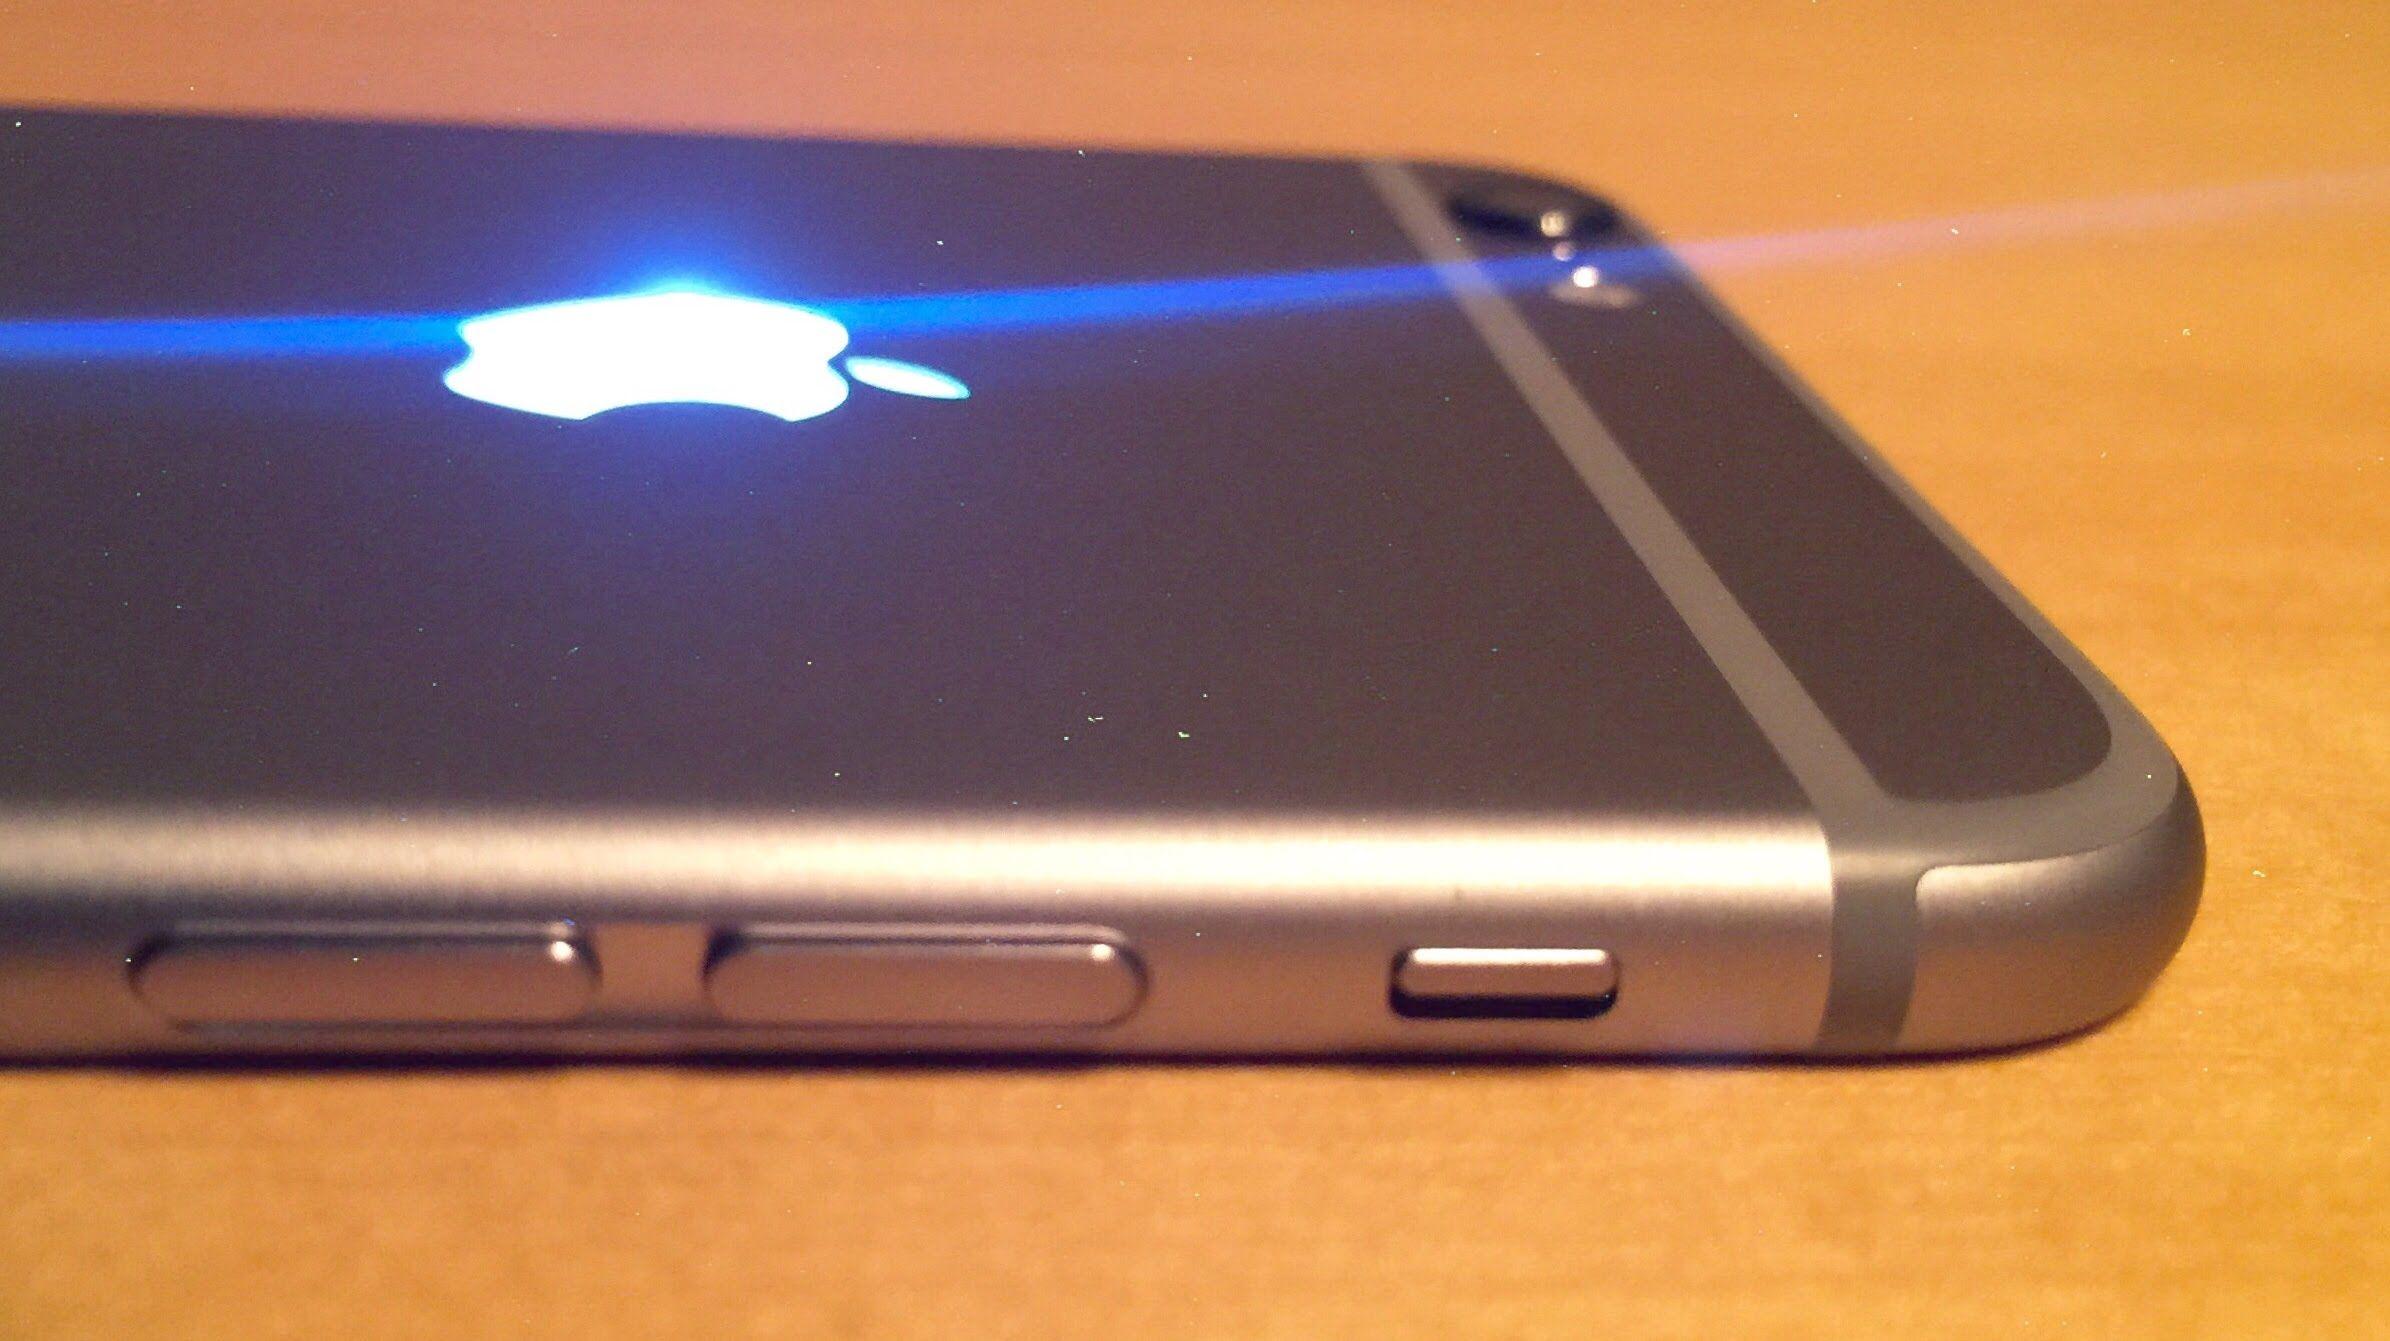 Glowing Apple Logo - How to install a glowing Apple logo on iPhone 6s